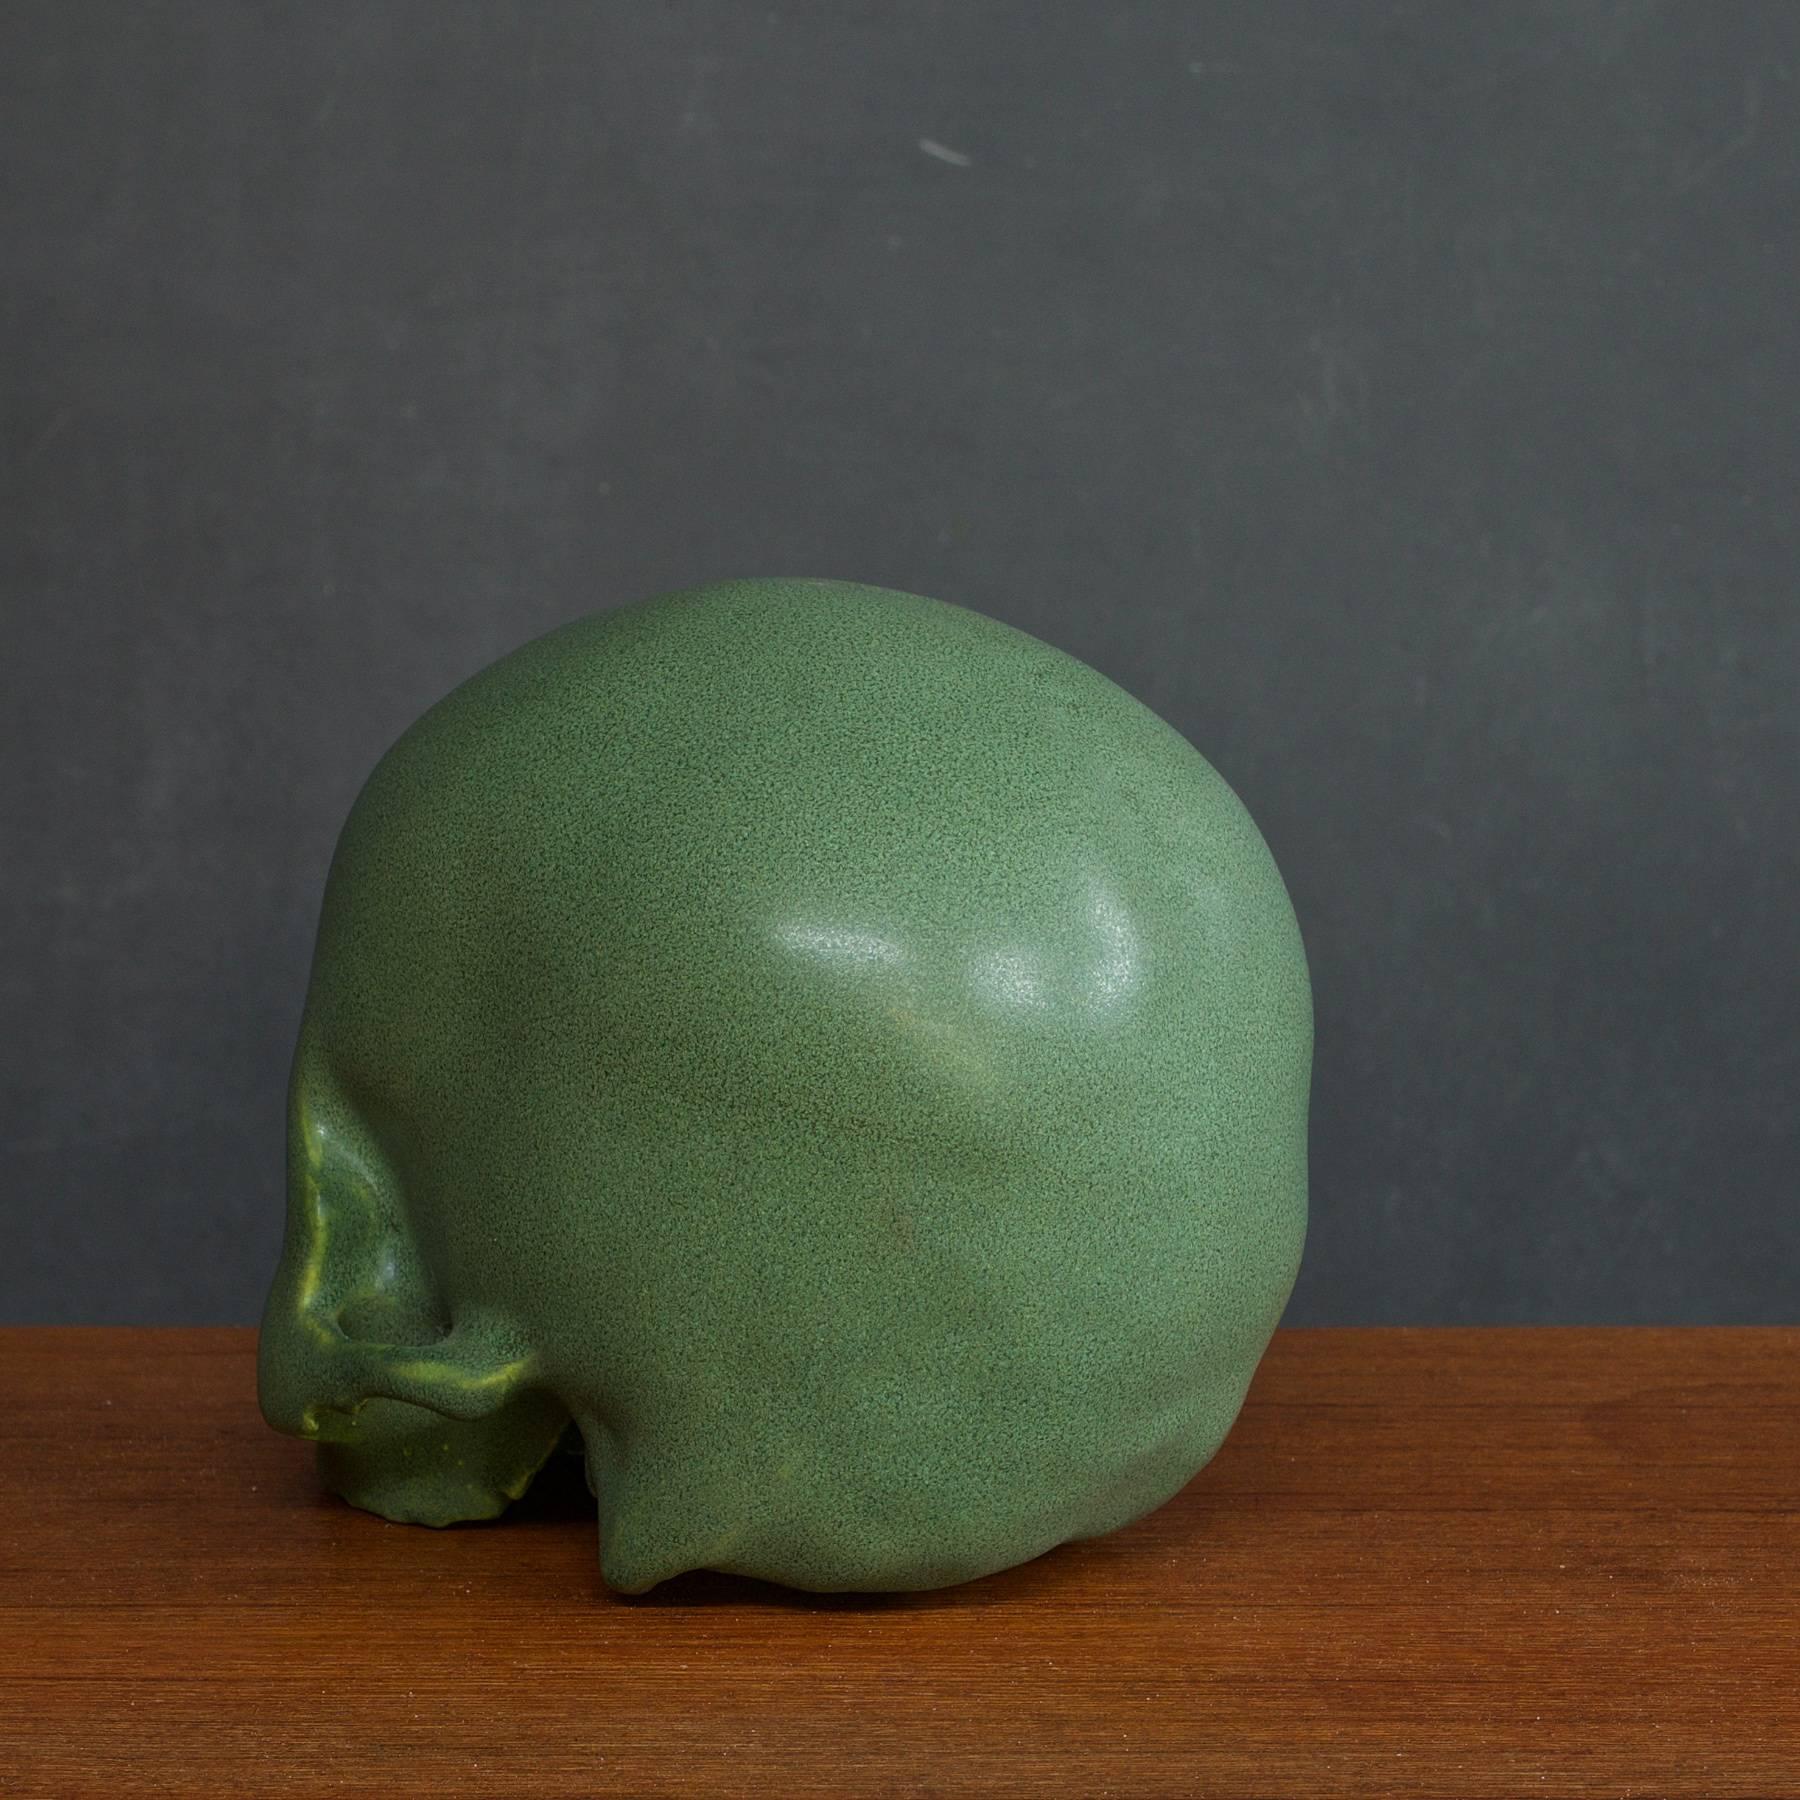 Arts and Crafts anatomic style glazed pottery skull sculpture bookend. Contemporary Reproduction.